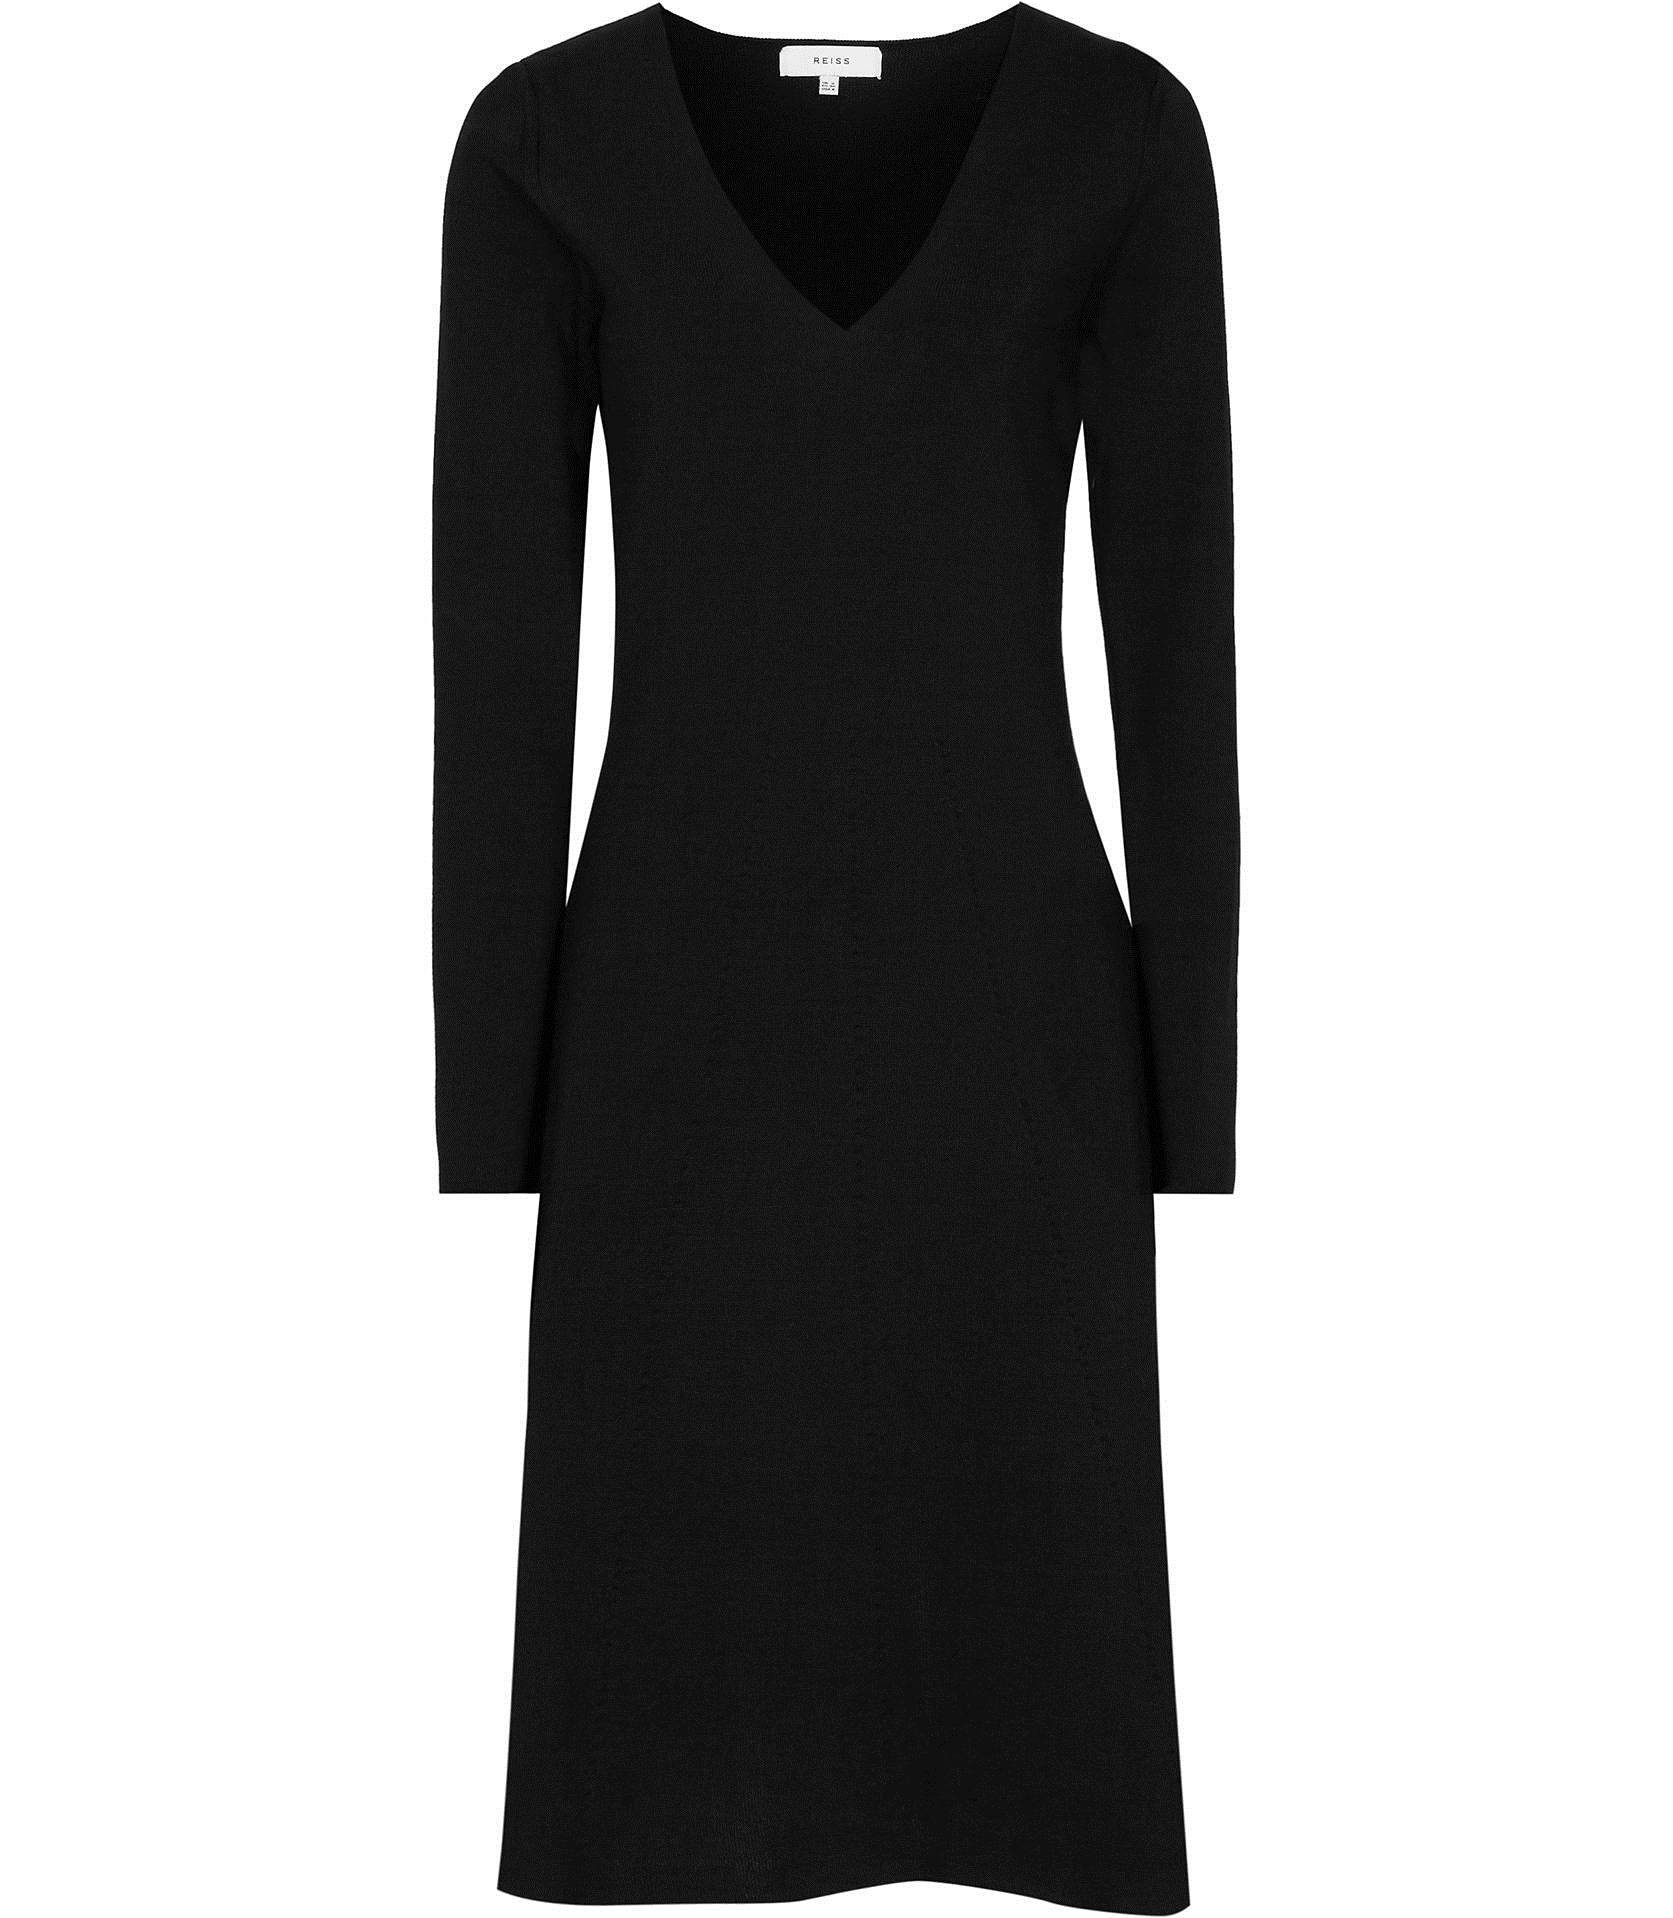 Reiss Emelia Black Knitted Fit And Flare Dress 29920120